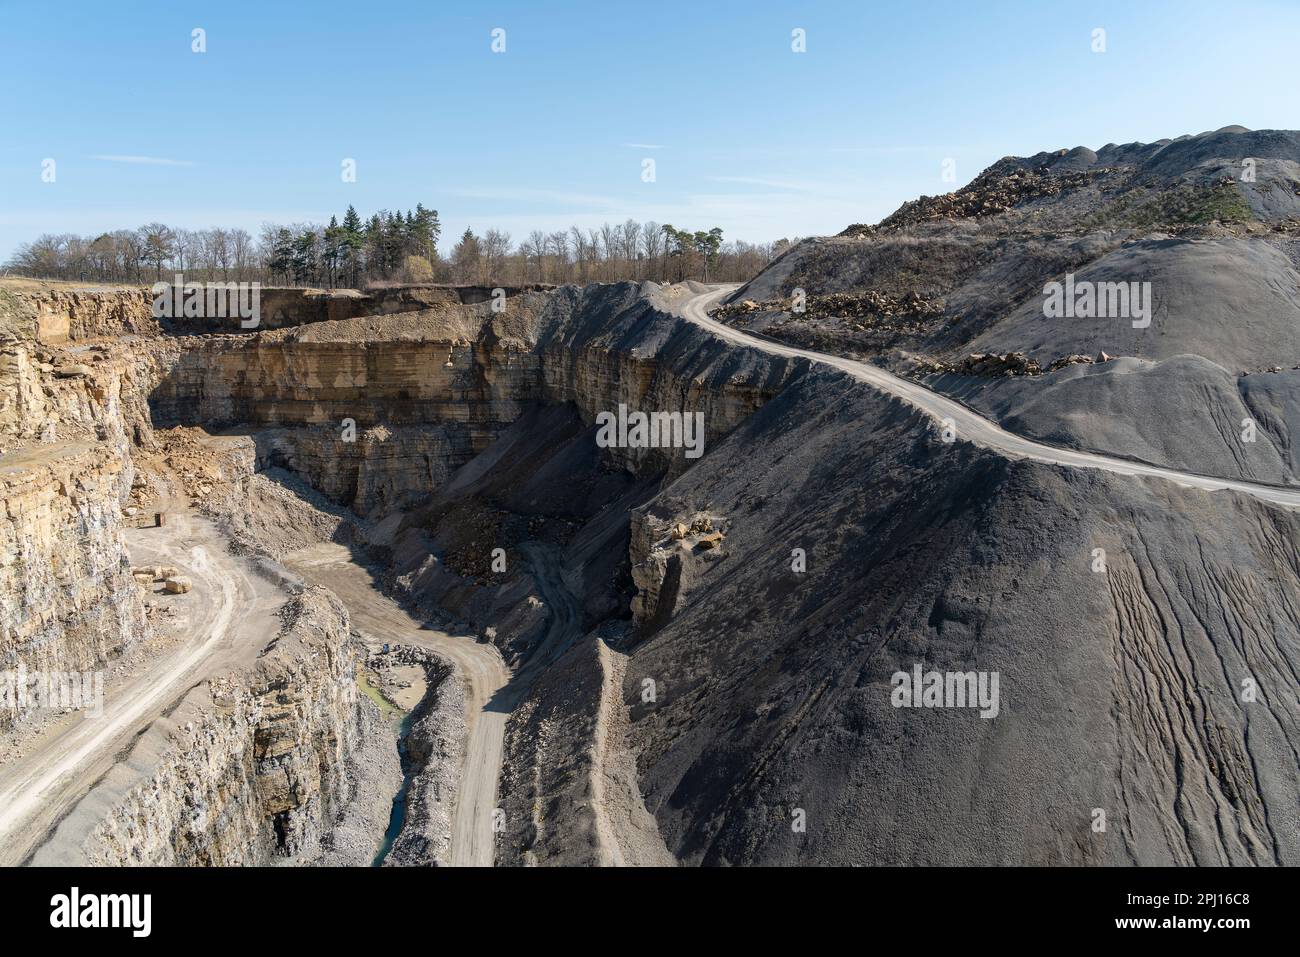 Scenery around a open-pit mine with gravel road, gravel and spoil piles in sunny ambiance Stock Photo